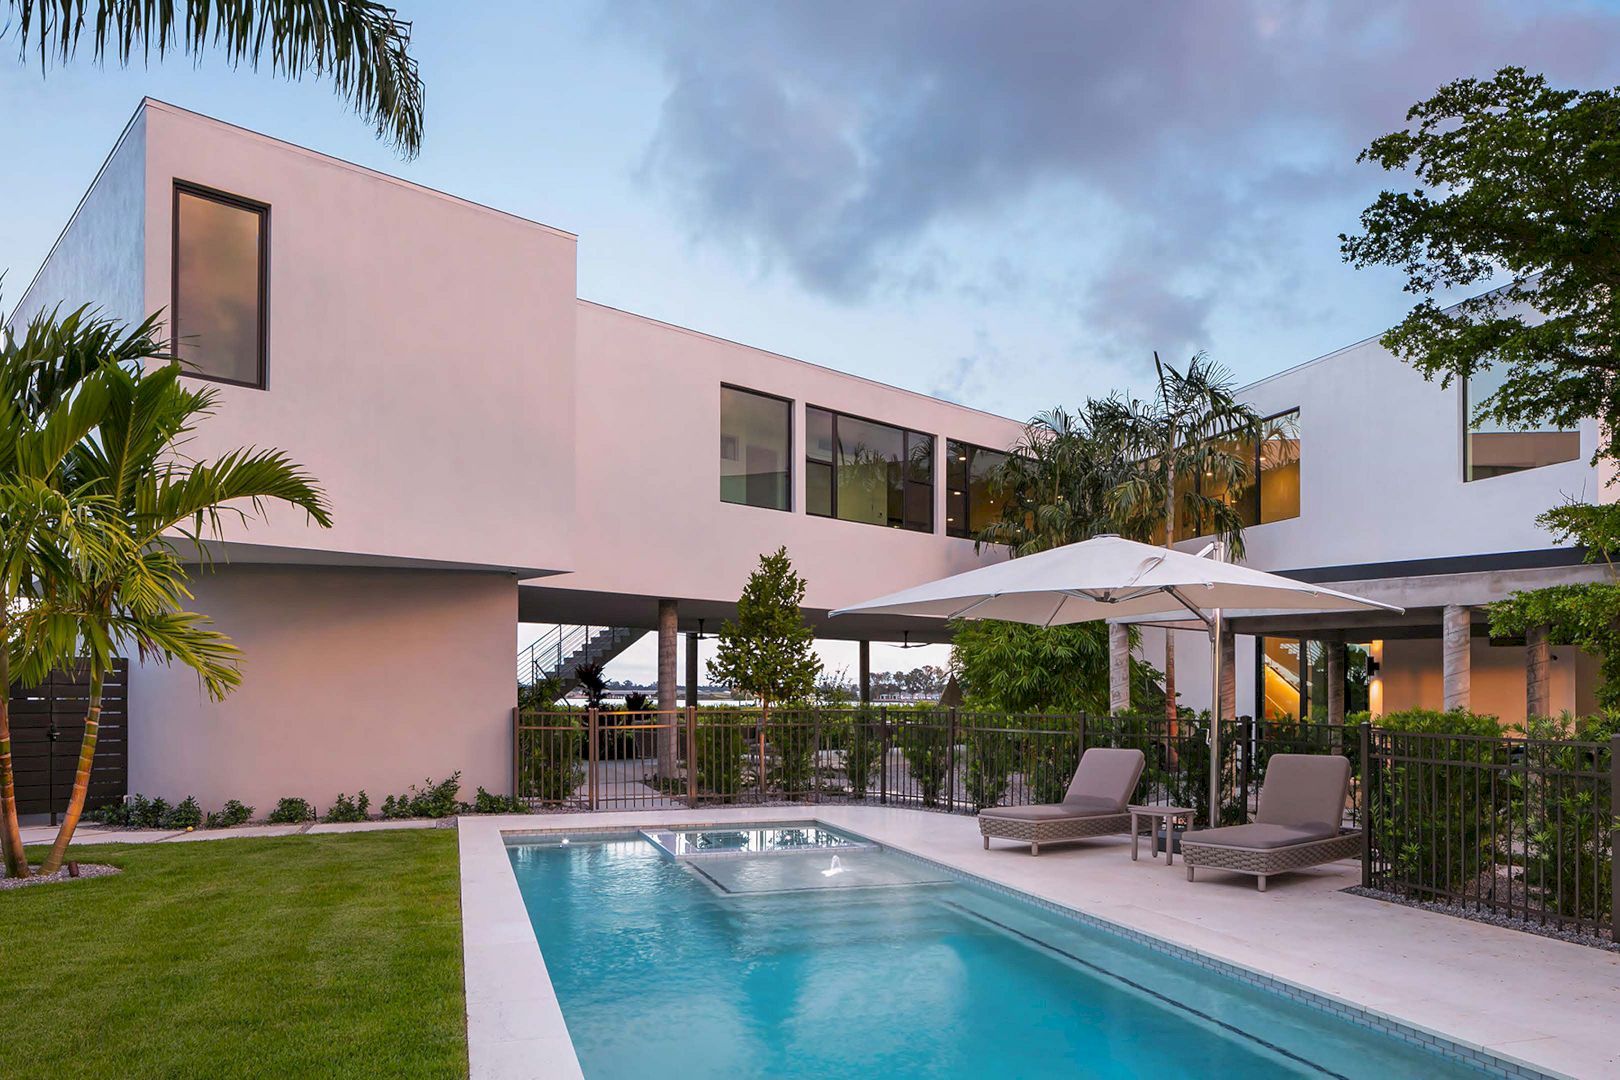 Palma Sola Modern: A Strong Connection to the Surrounding Landscape